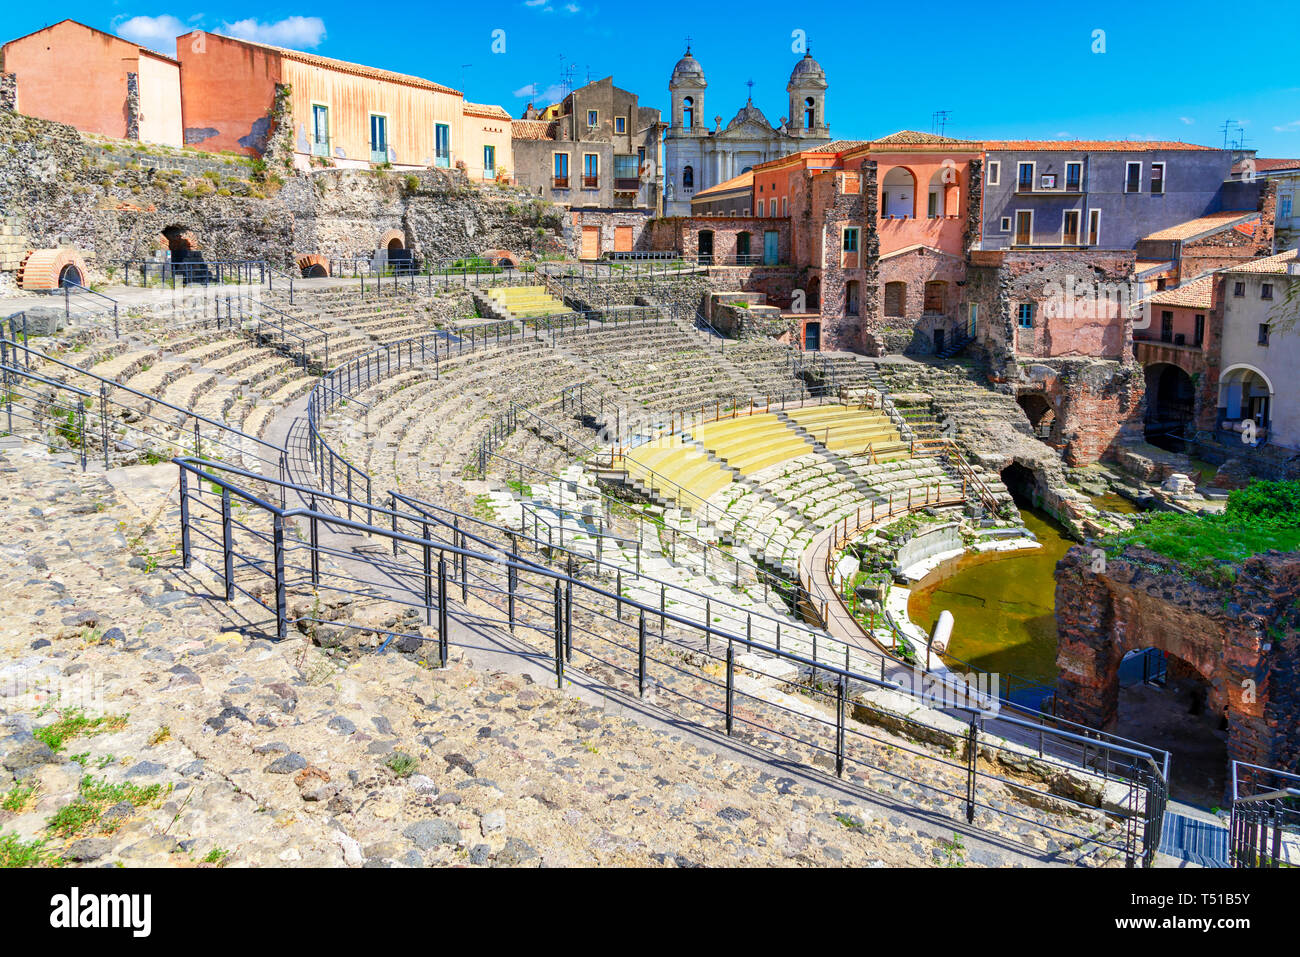 Catania, Sicily island, Italy: Ruins of the ancient Roman theatre, built from the limestone and black lava Stock Photo